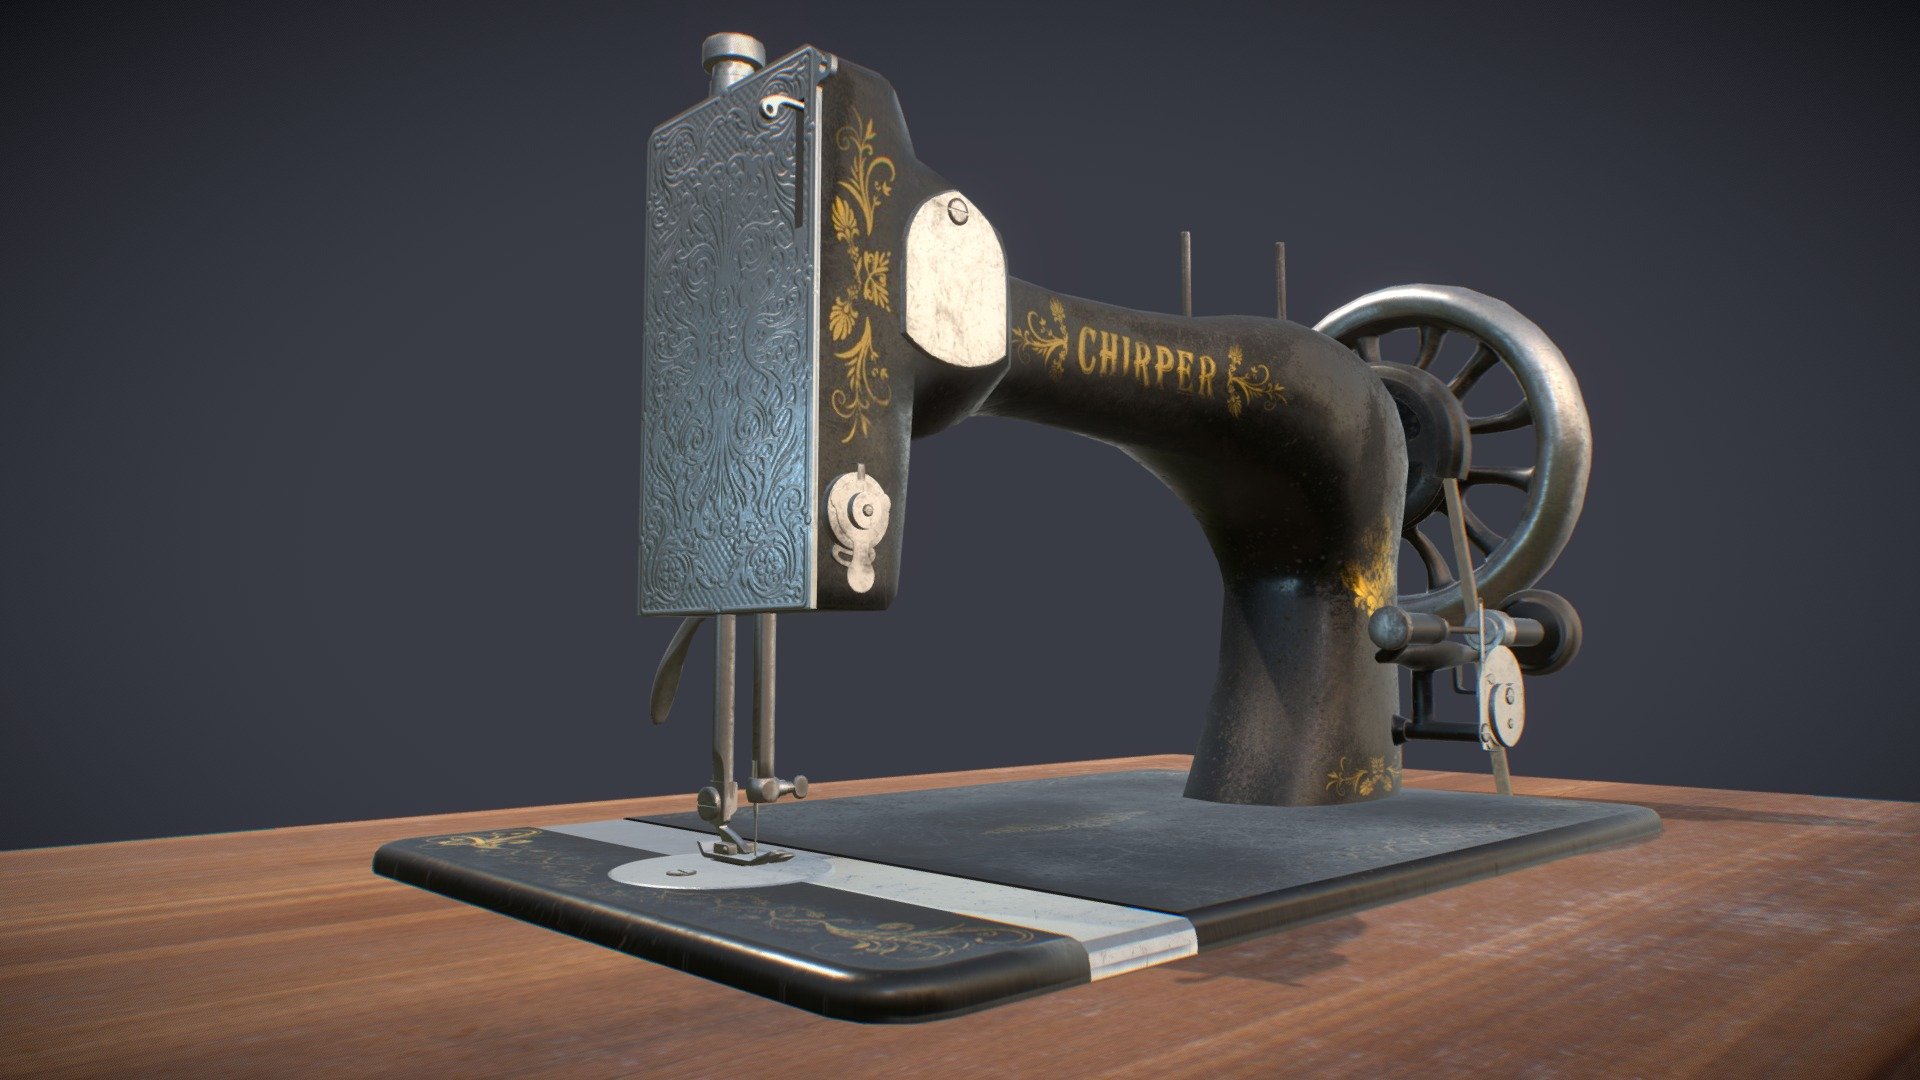 The Elegant design and relaxing sound of the machine spining what made me start the project. it's a center part of an up coming piece I have in mind a theme about tailoring. 



Hard surface &amp; modeling &amp; texturing of old style singer sewing machine. 

follow me on:
twitter:@fn_Nofe
Instagram:@Fn_Nofe - Chirper Machine - 3D model by fn_Nofe 3d model